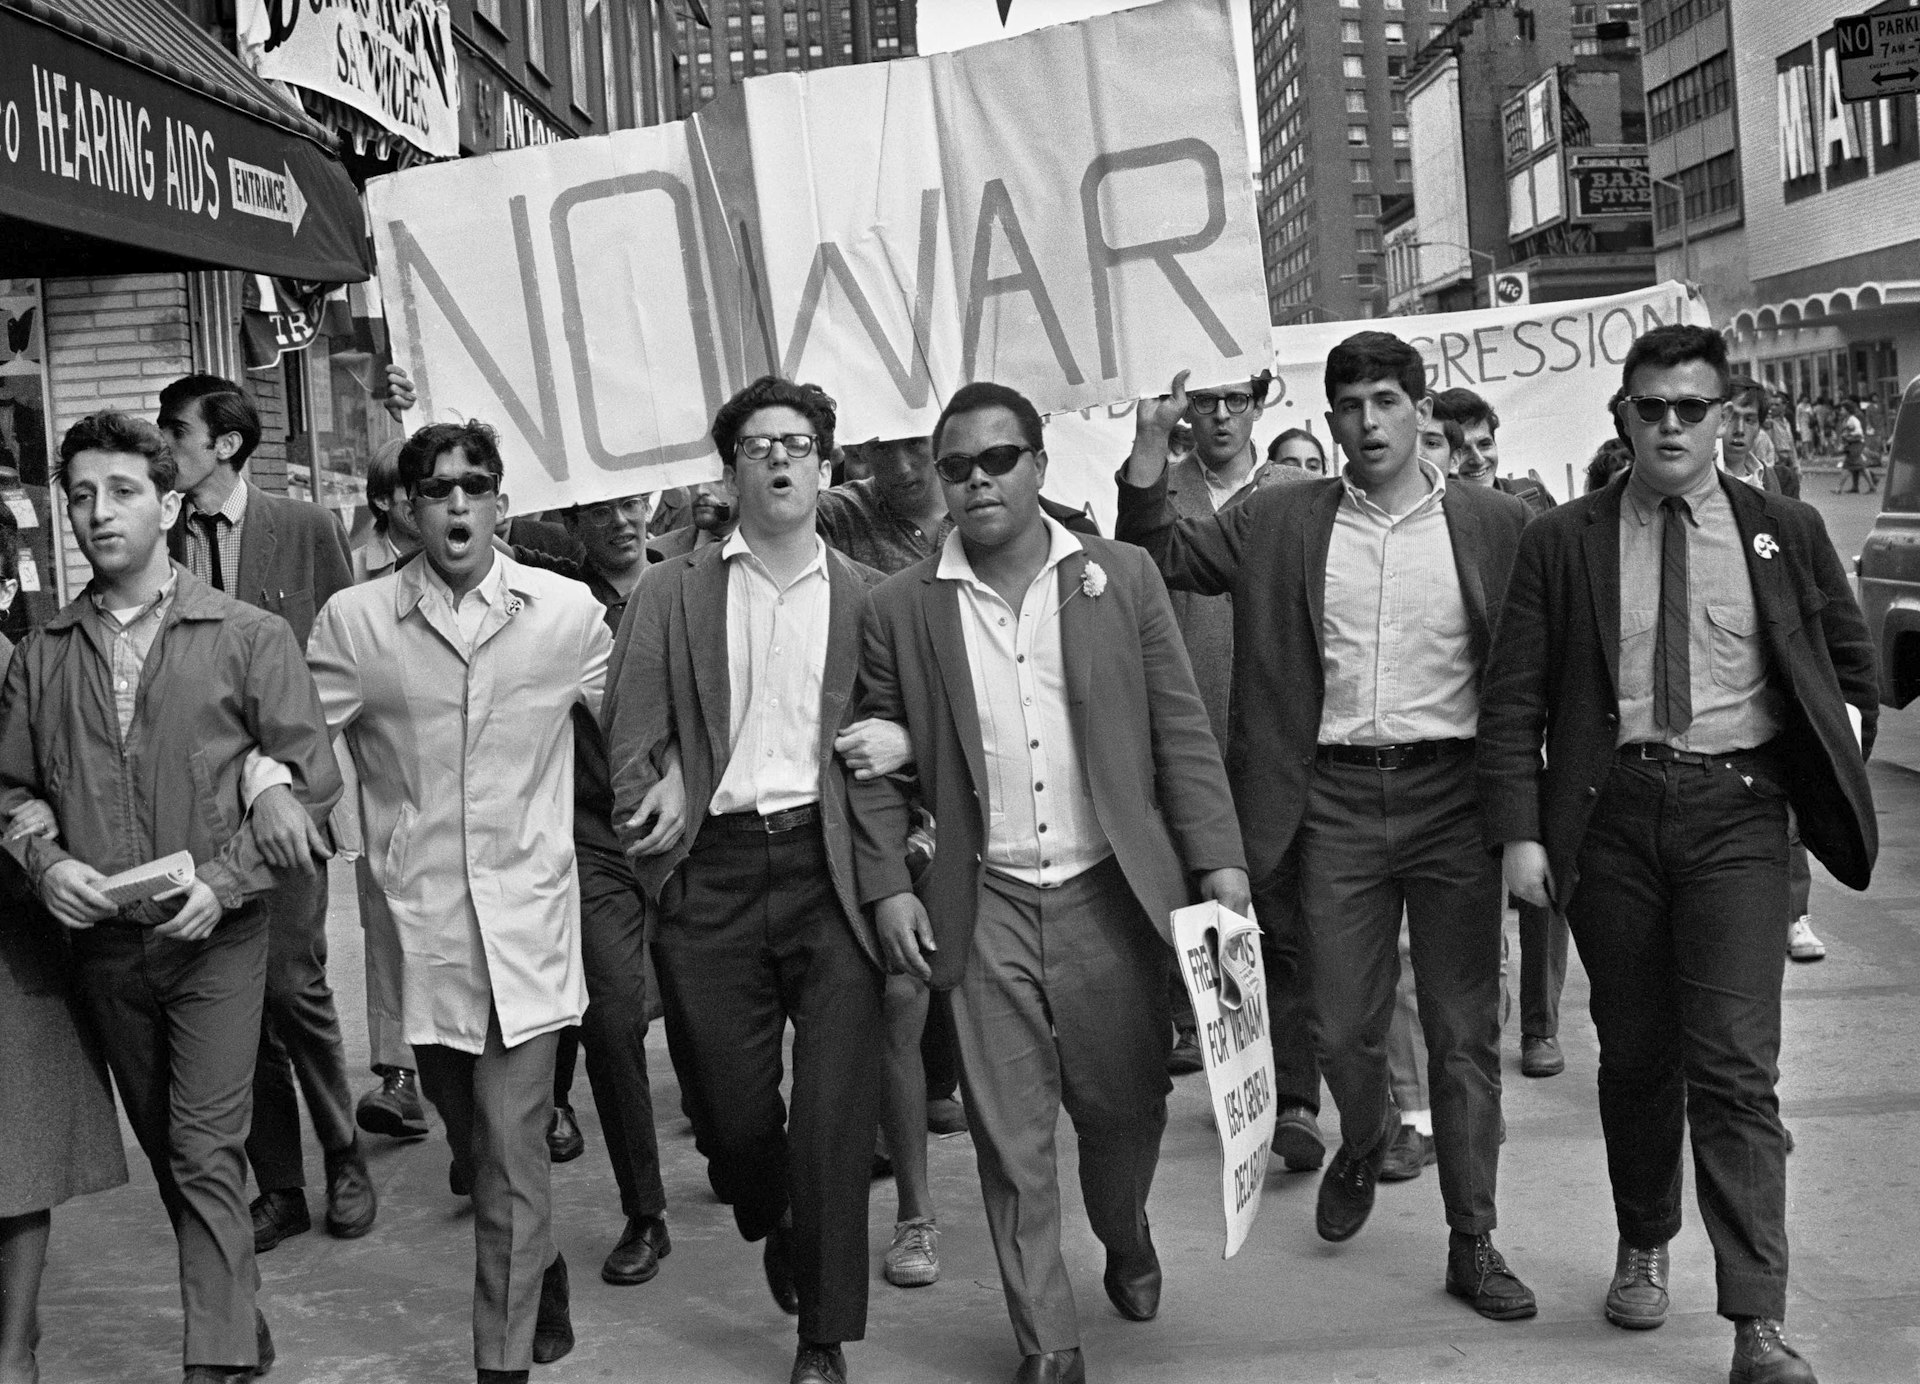 A visual history of resistance in New York City